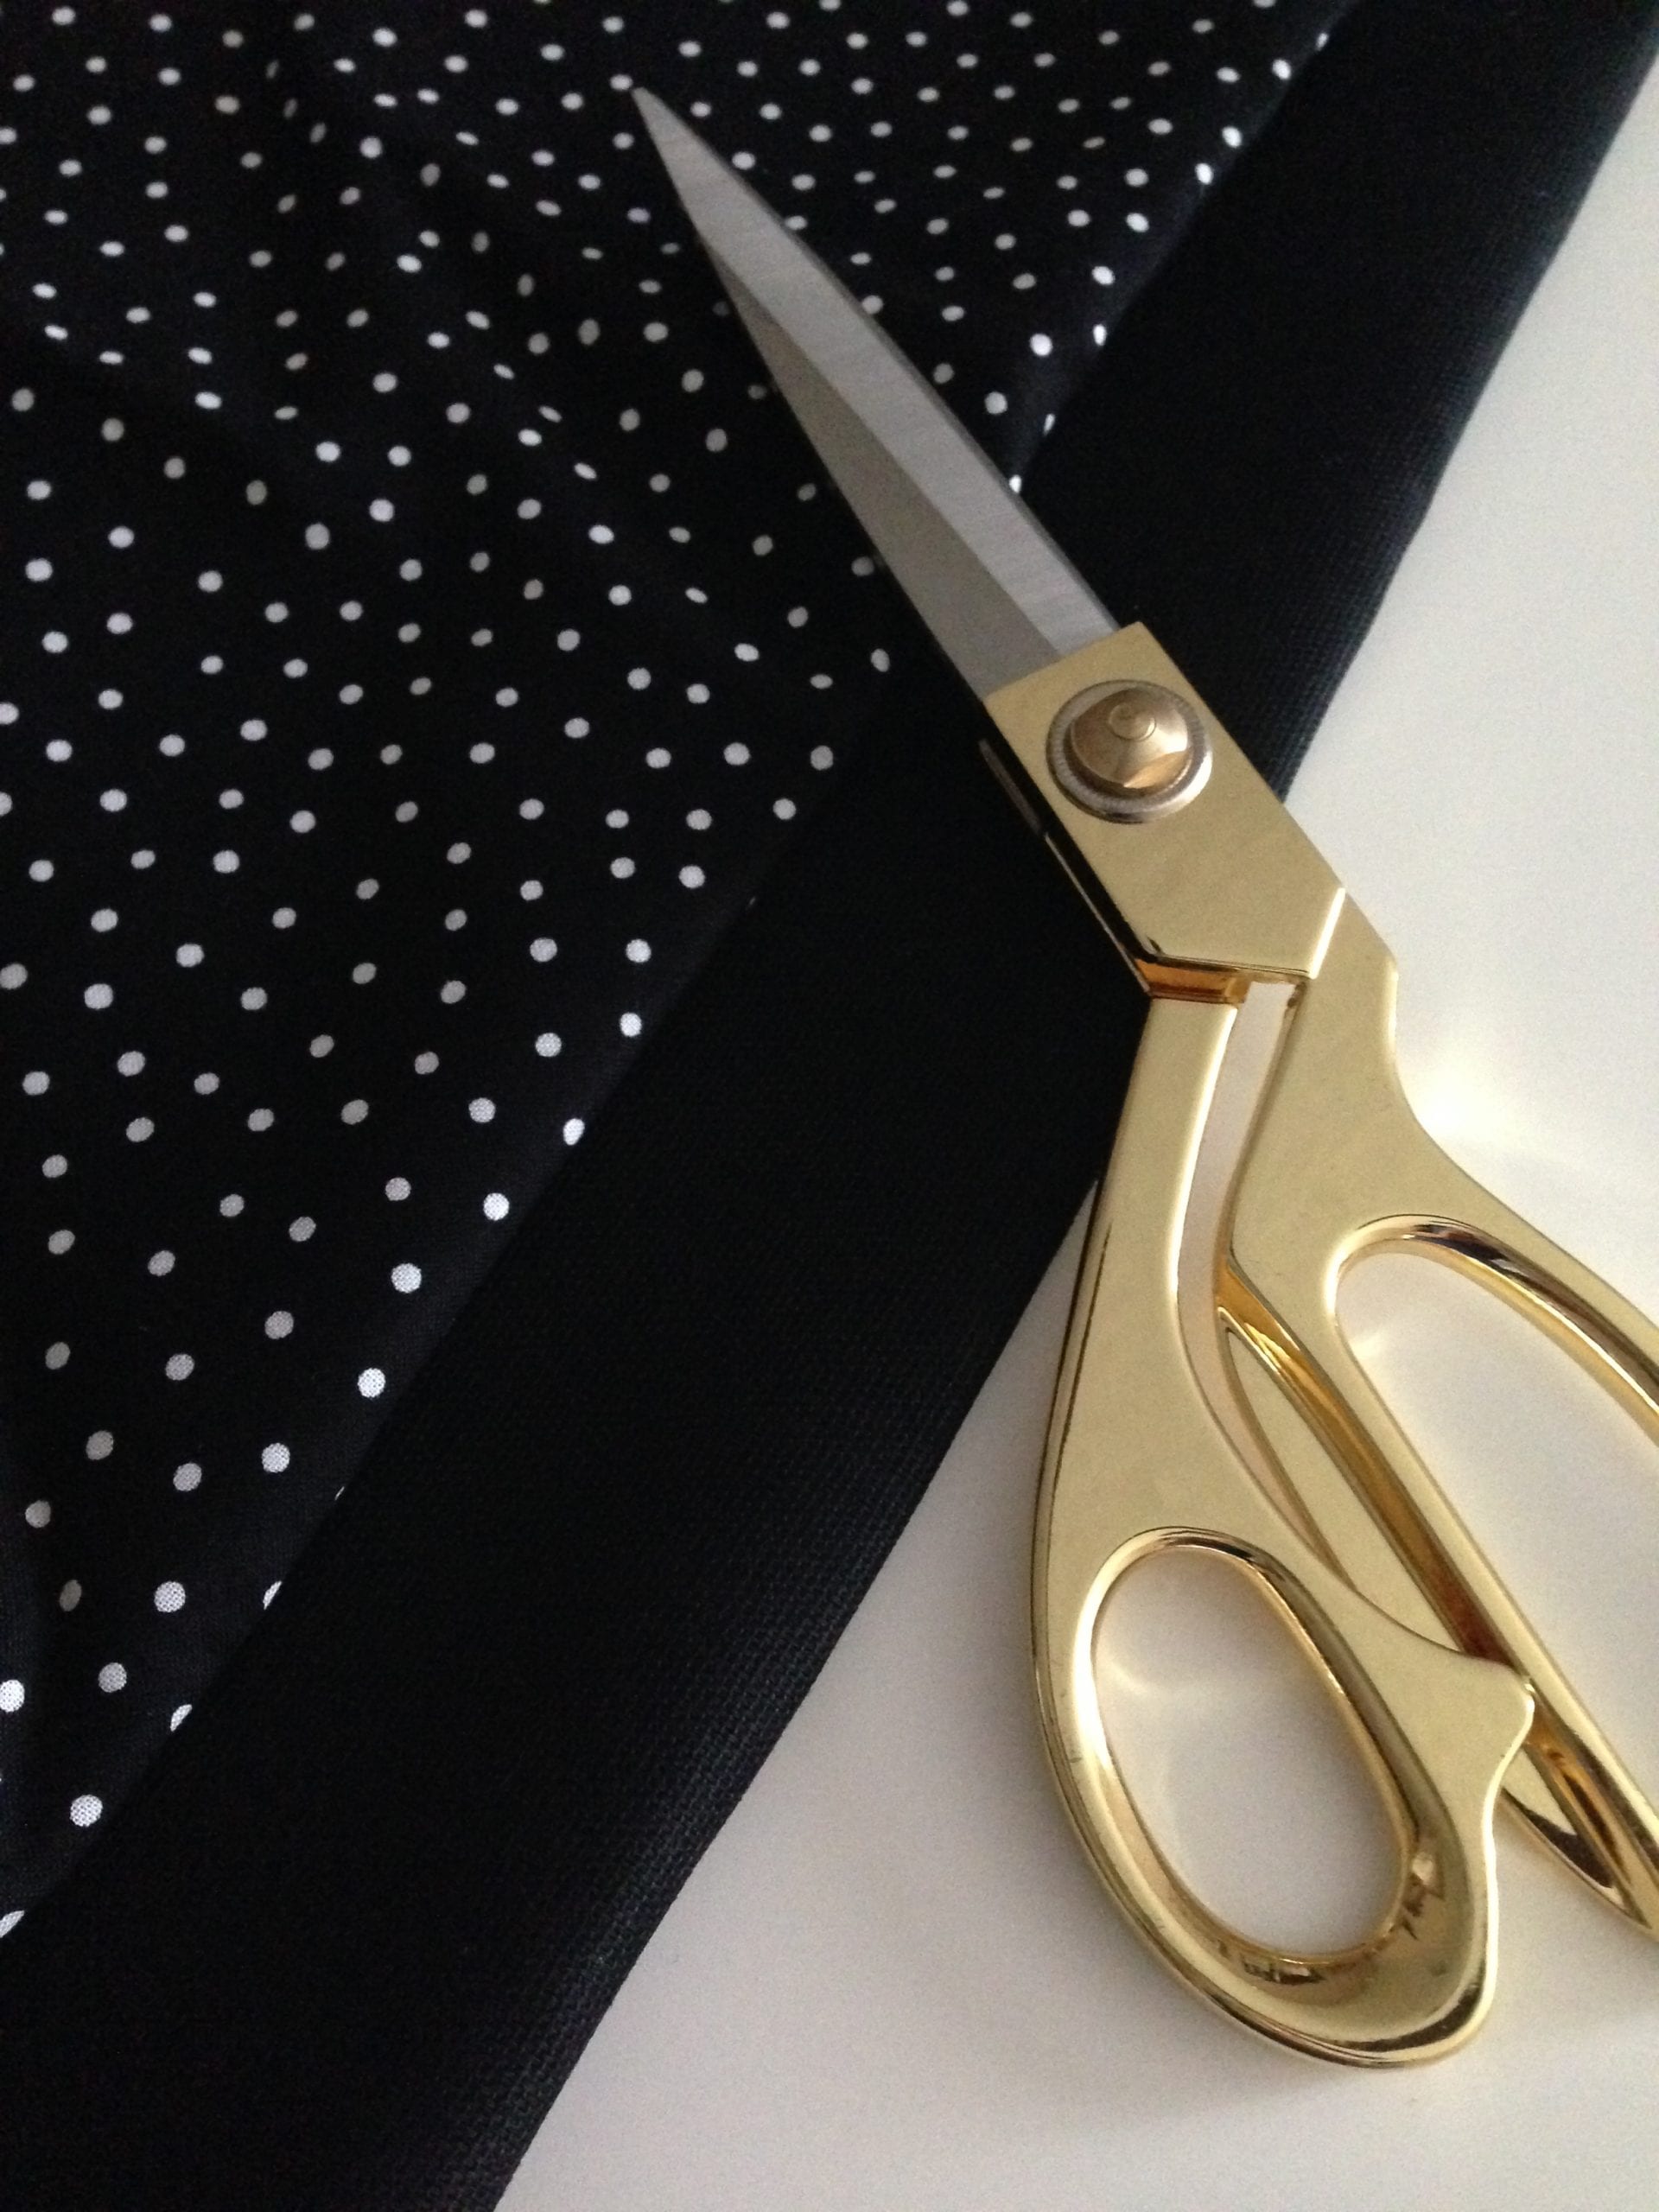 Black-fabric-and-gold-scissors-wldesigns